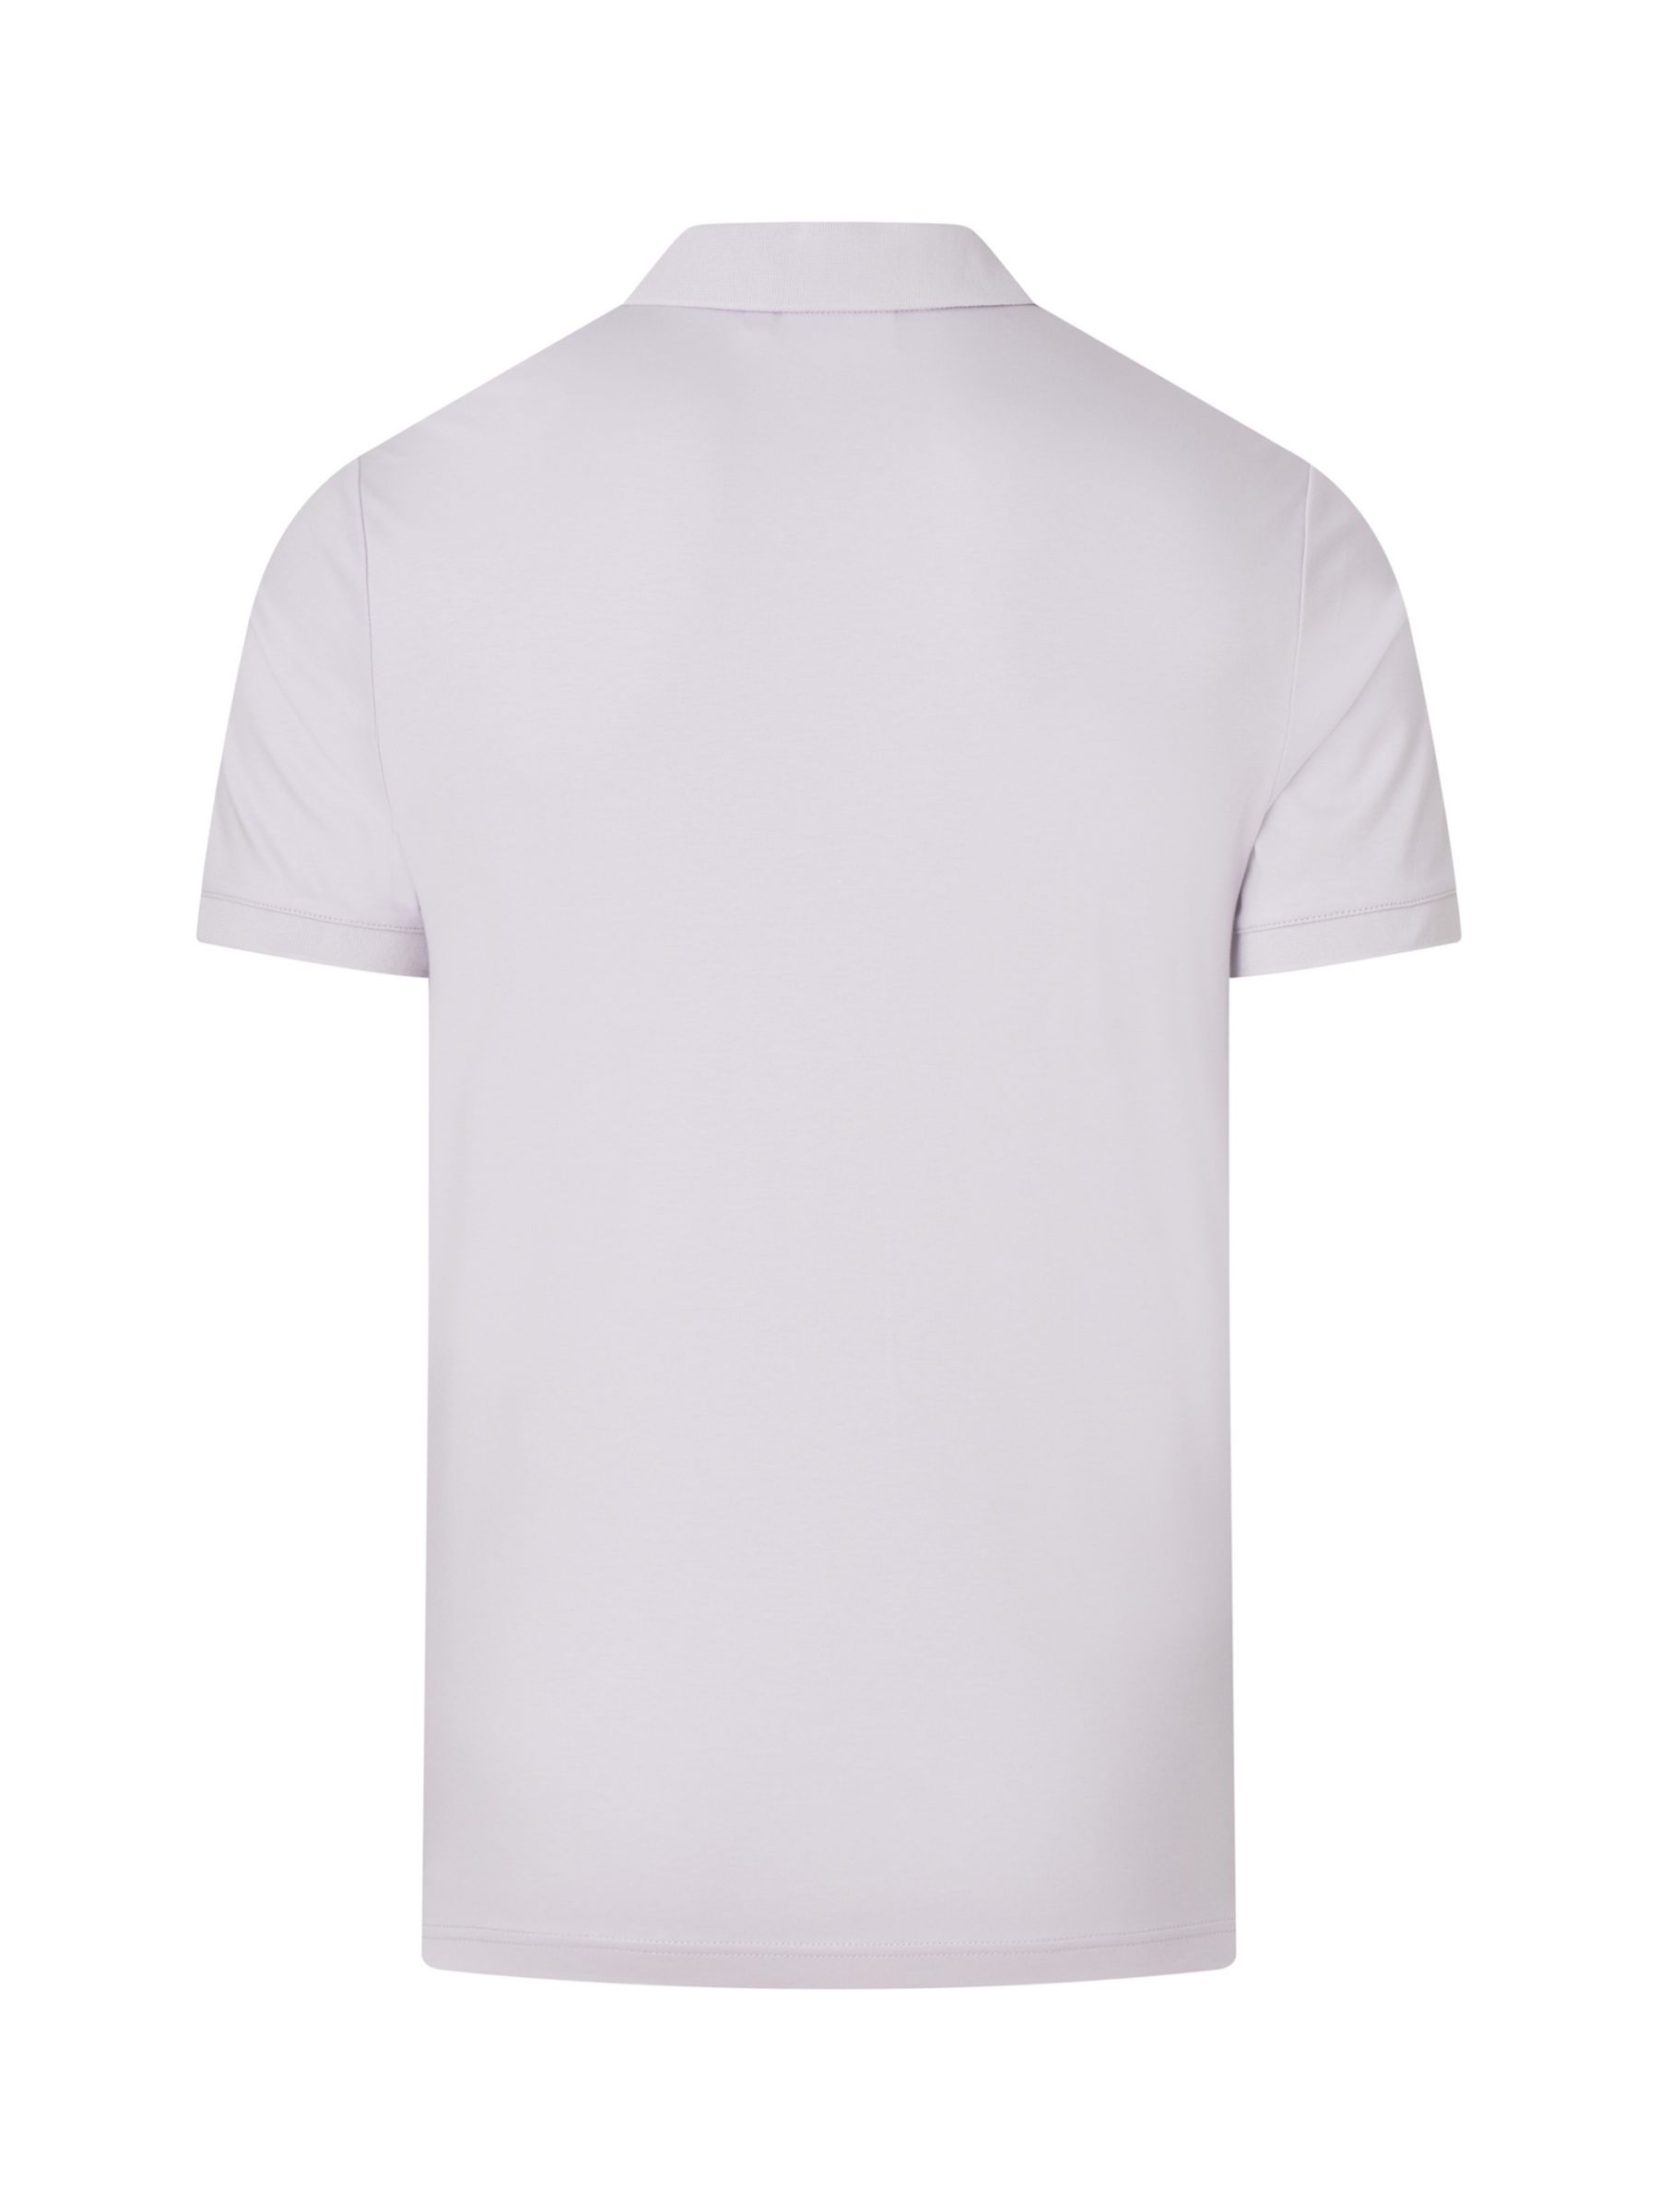 Buy Slim Fit Polo Shirt Online at johnlewis.com